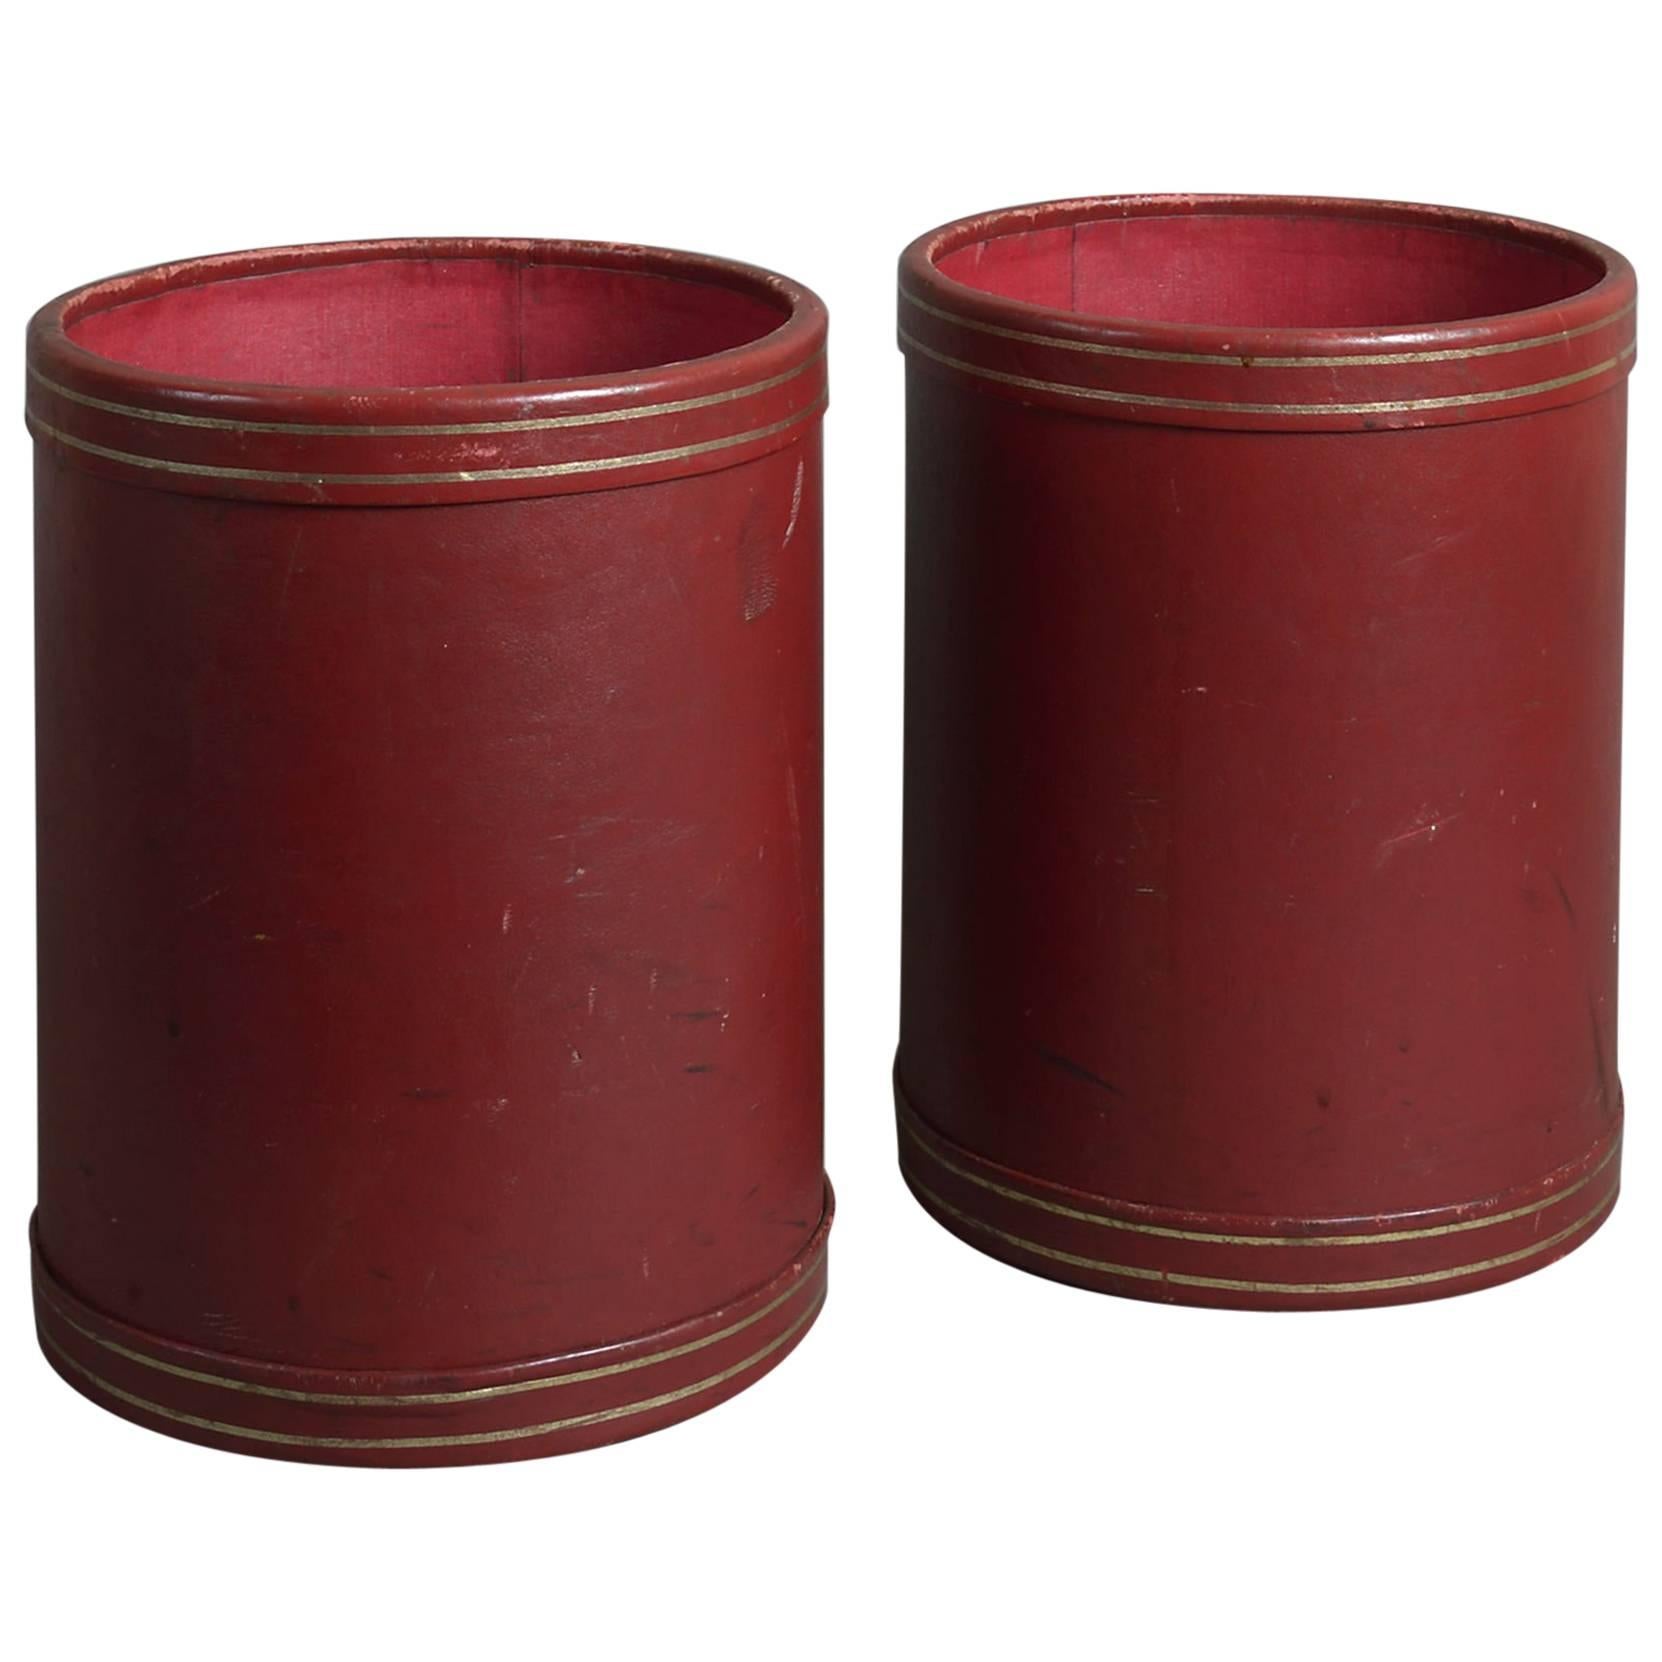 Pair of Mid-20th Century Moroccan Red Leather Paper Baskets